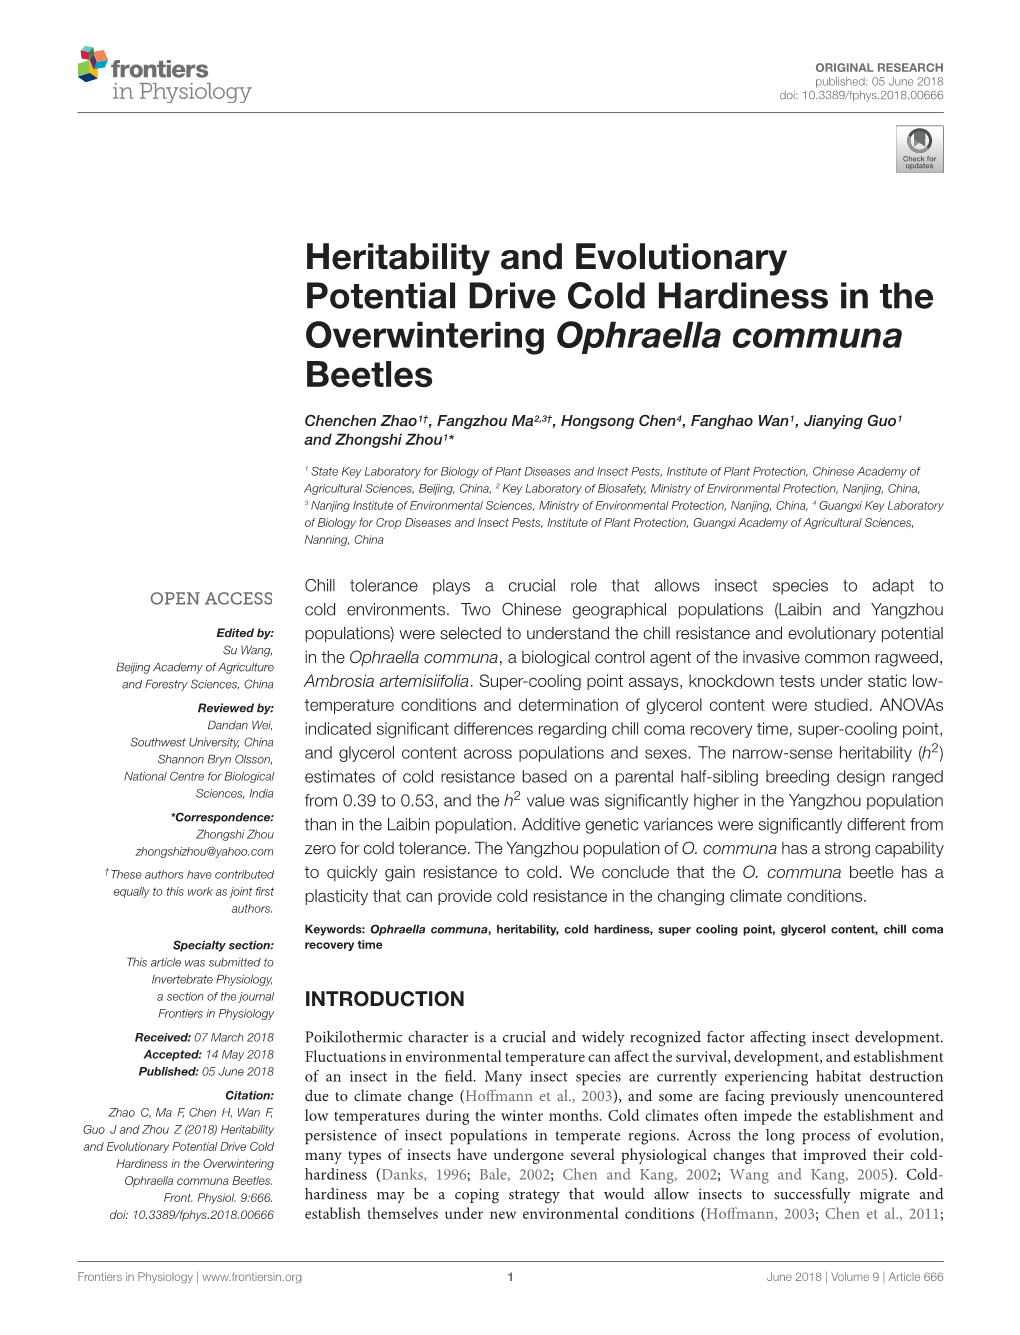 Heritability and Evolutionary Potential Drive Cold Hardiness in the Overwintering Ophraella Communa Beetles